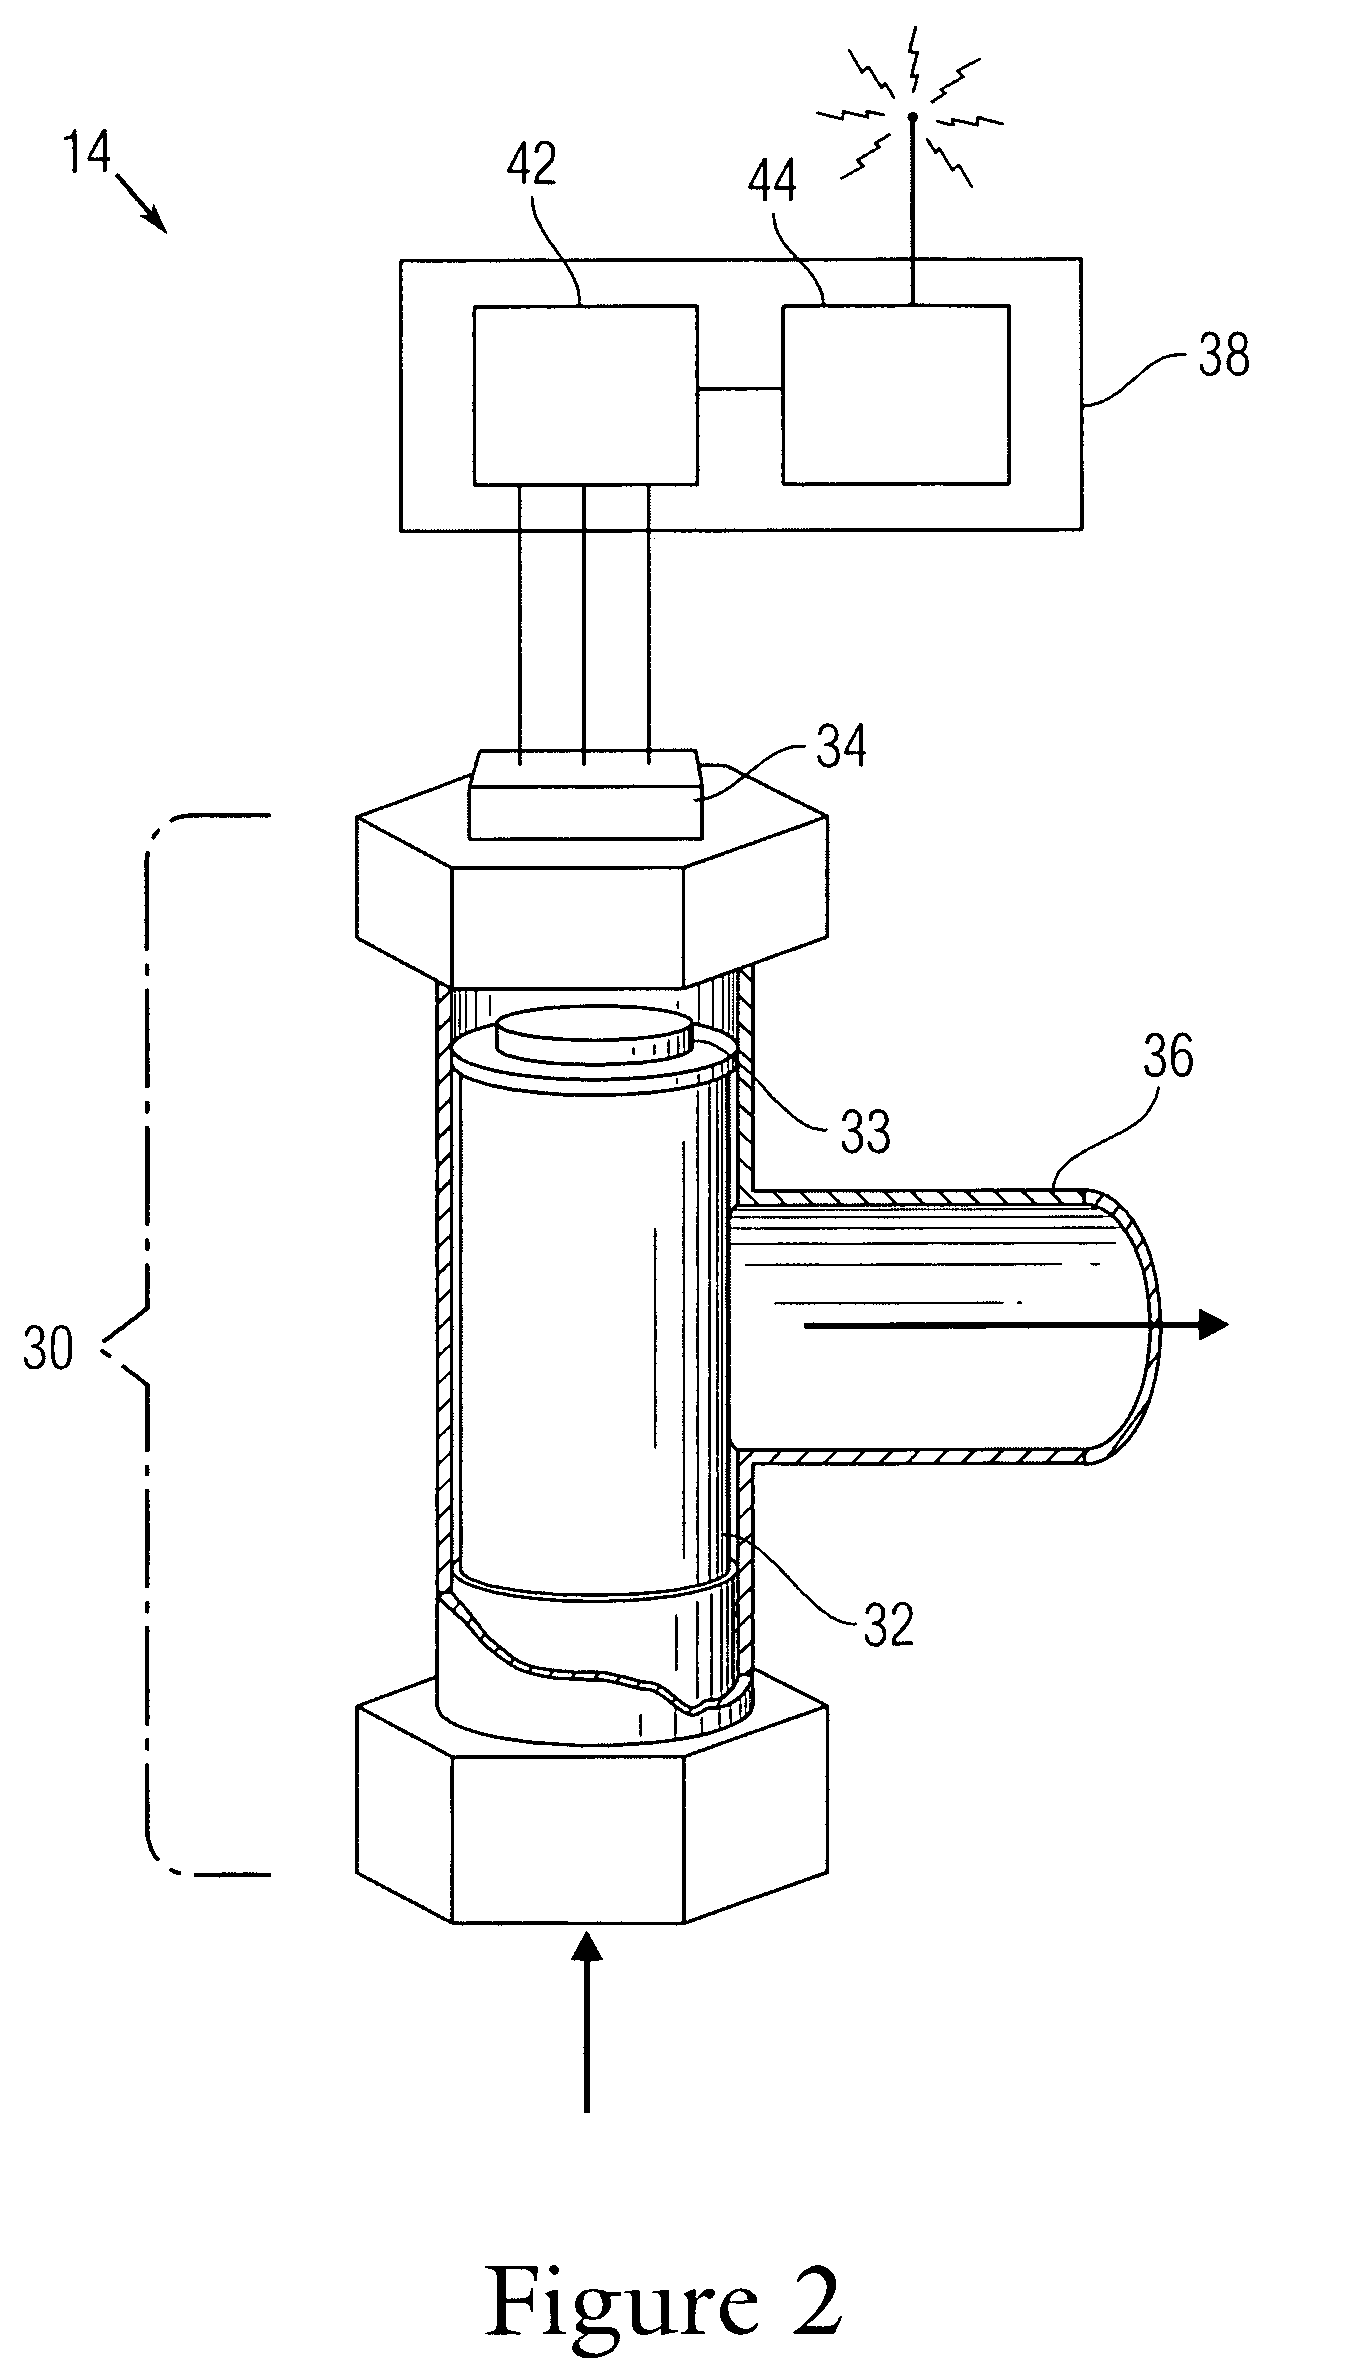 Wireless water flow monitoring and leak detection system, and method